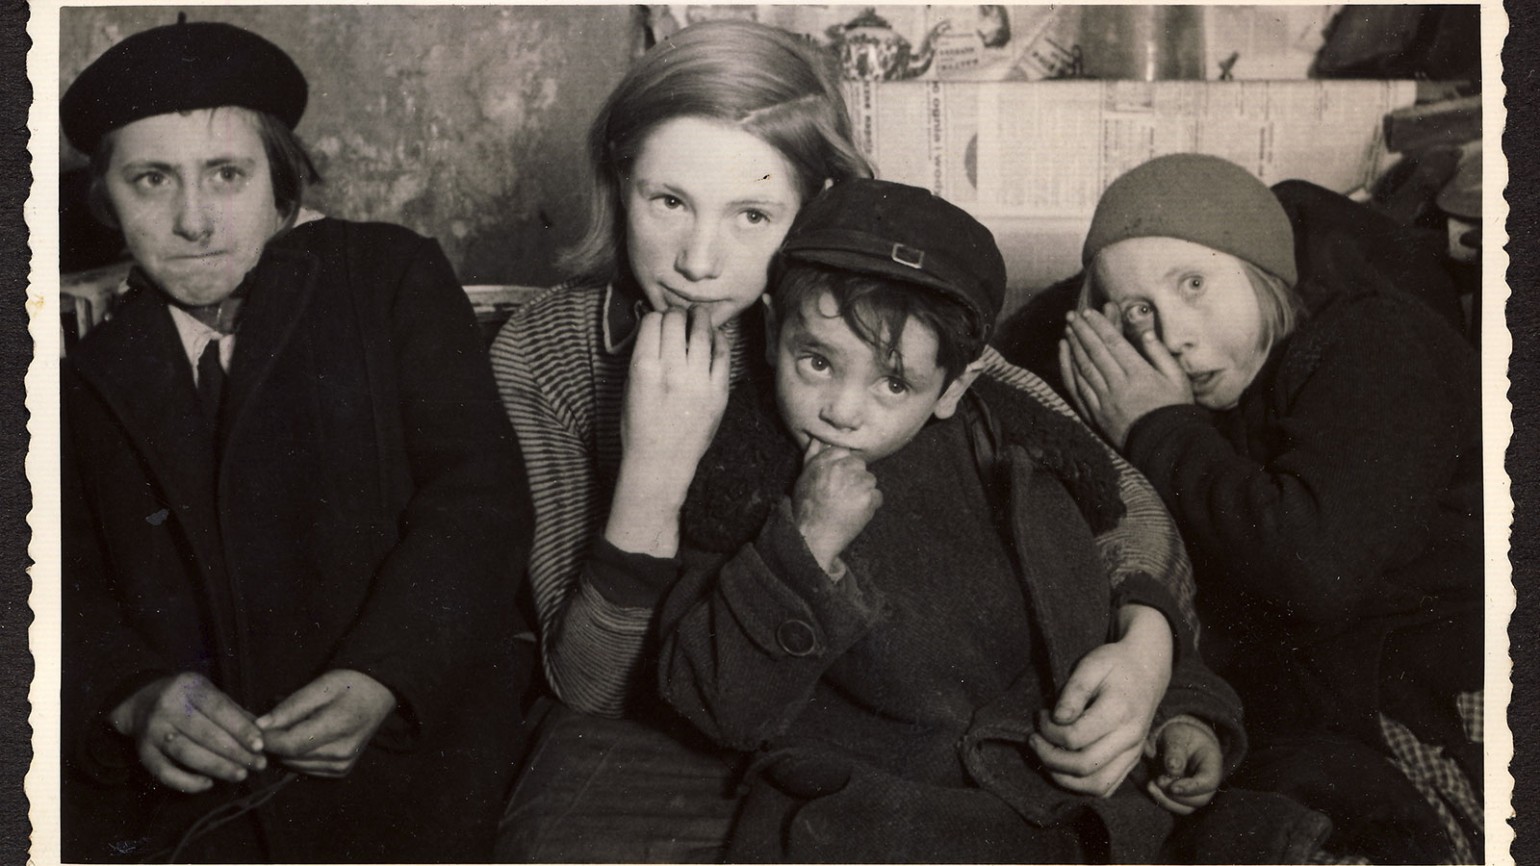 Refugees in France, photographed by Martha Sharp, 1940. Photo courtesy of Sharp Family Archives.